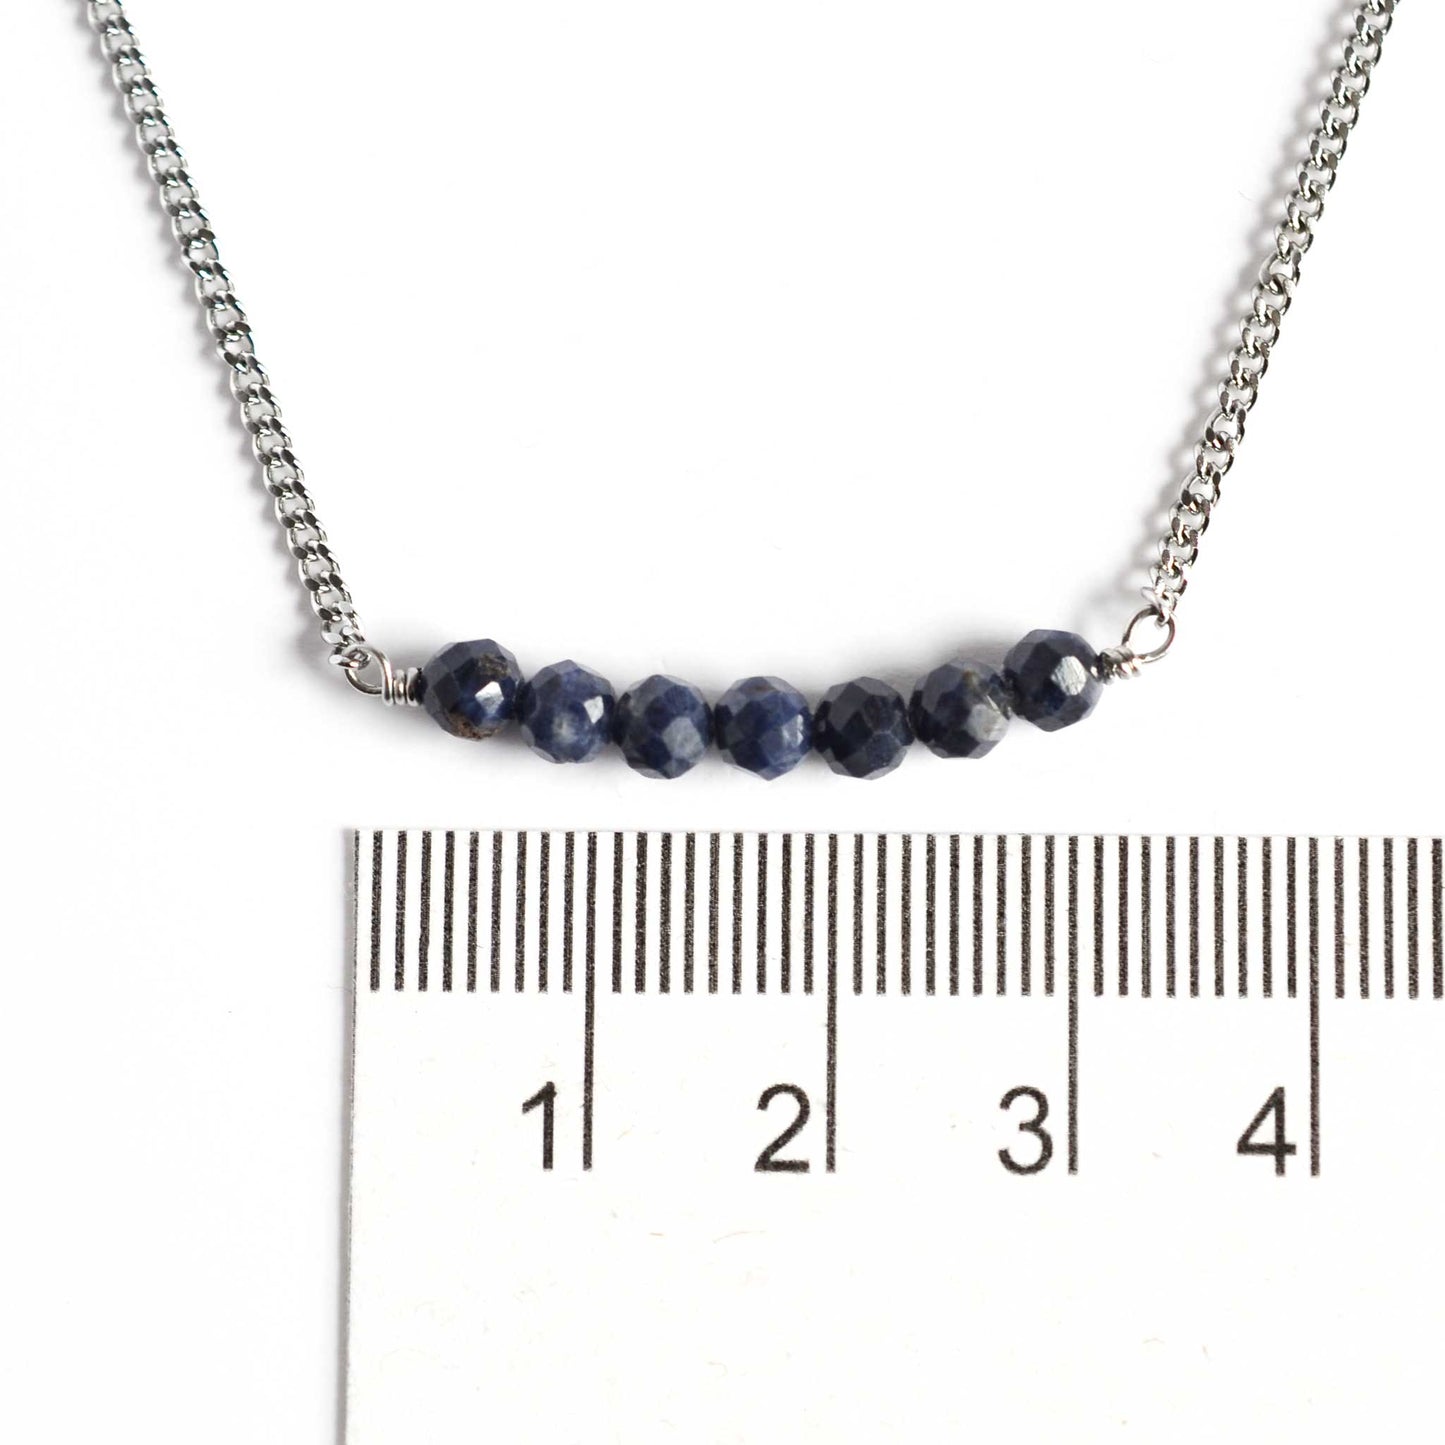 Dainty Sapphire necklace with 4mm gemstone beads next to ruler